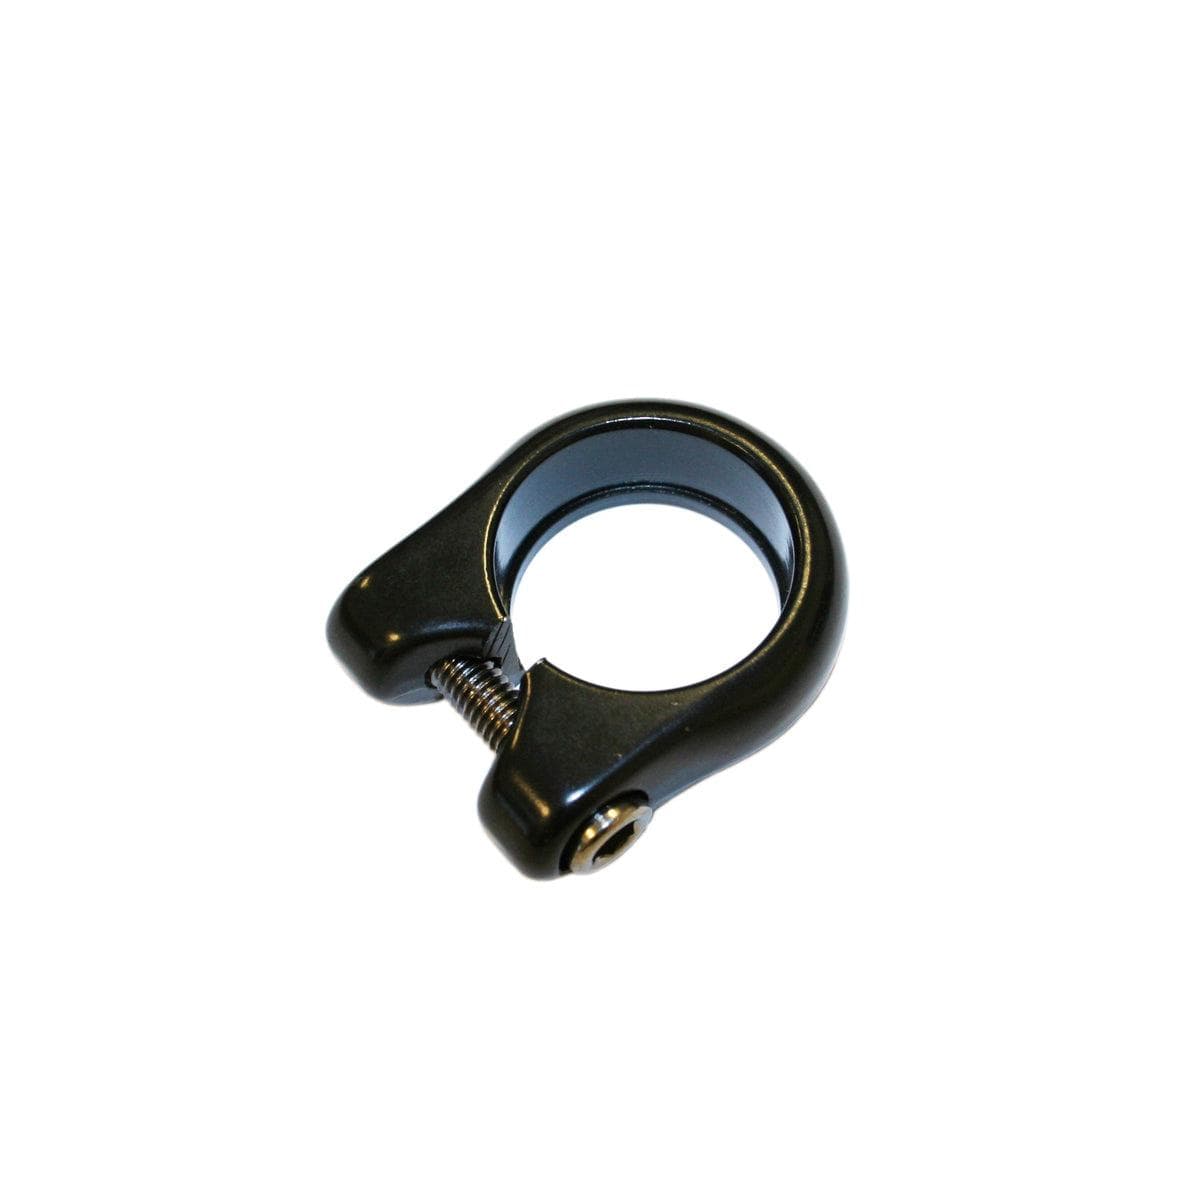 Look Spare - Seatpost Clamp Fits Kg386I (1 Pc):